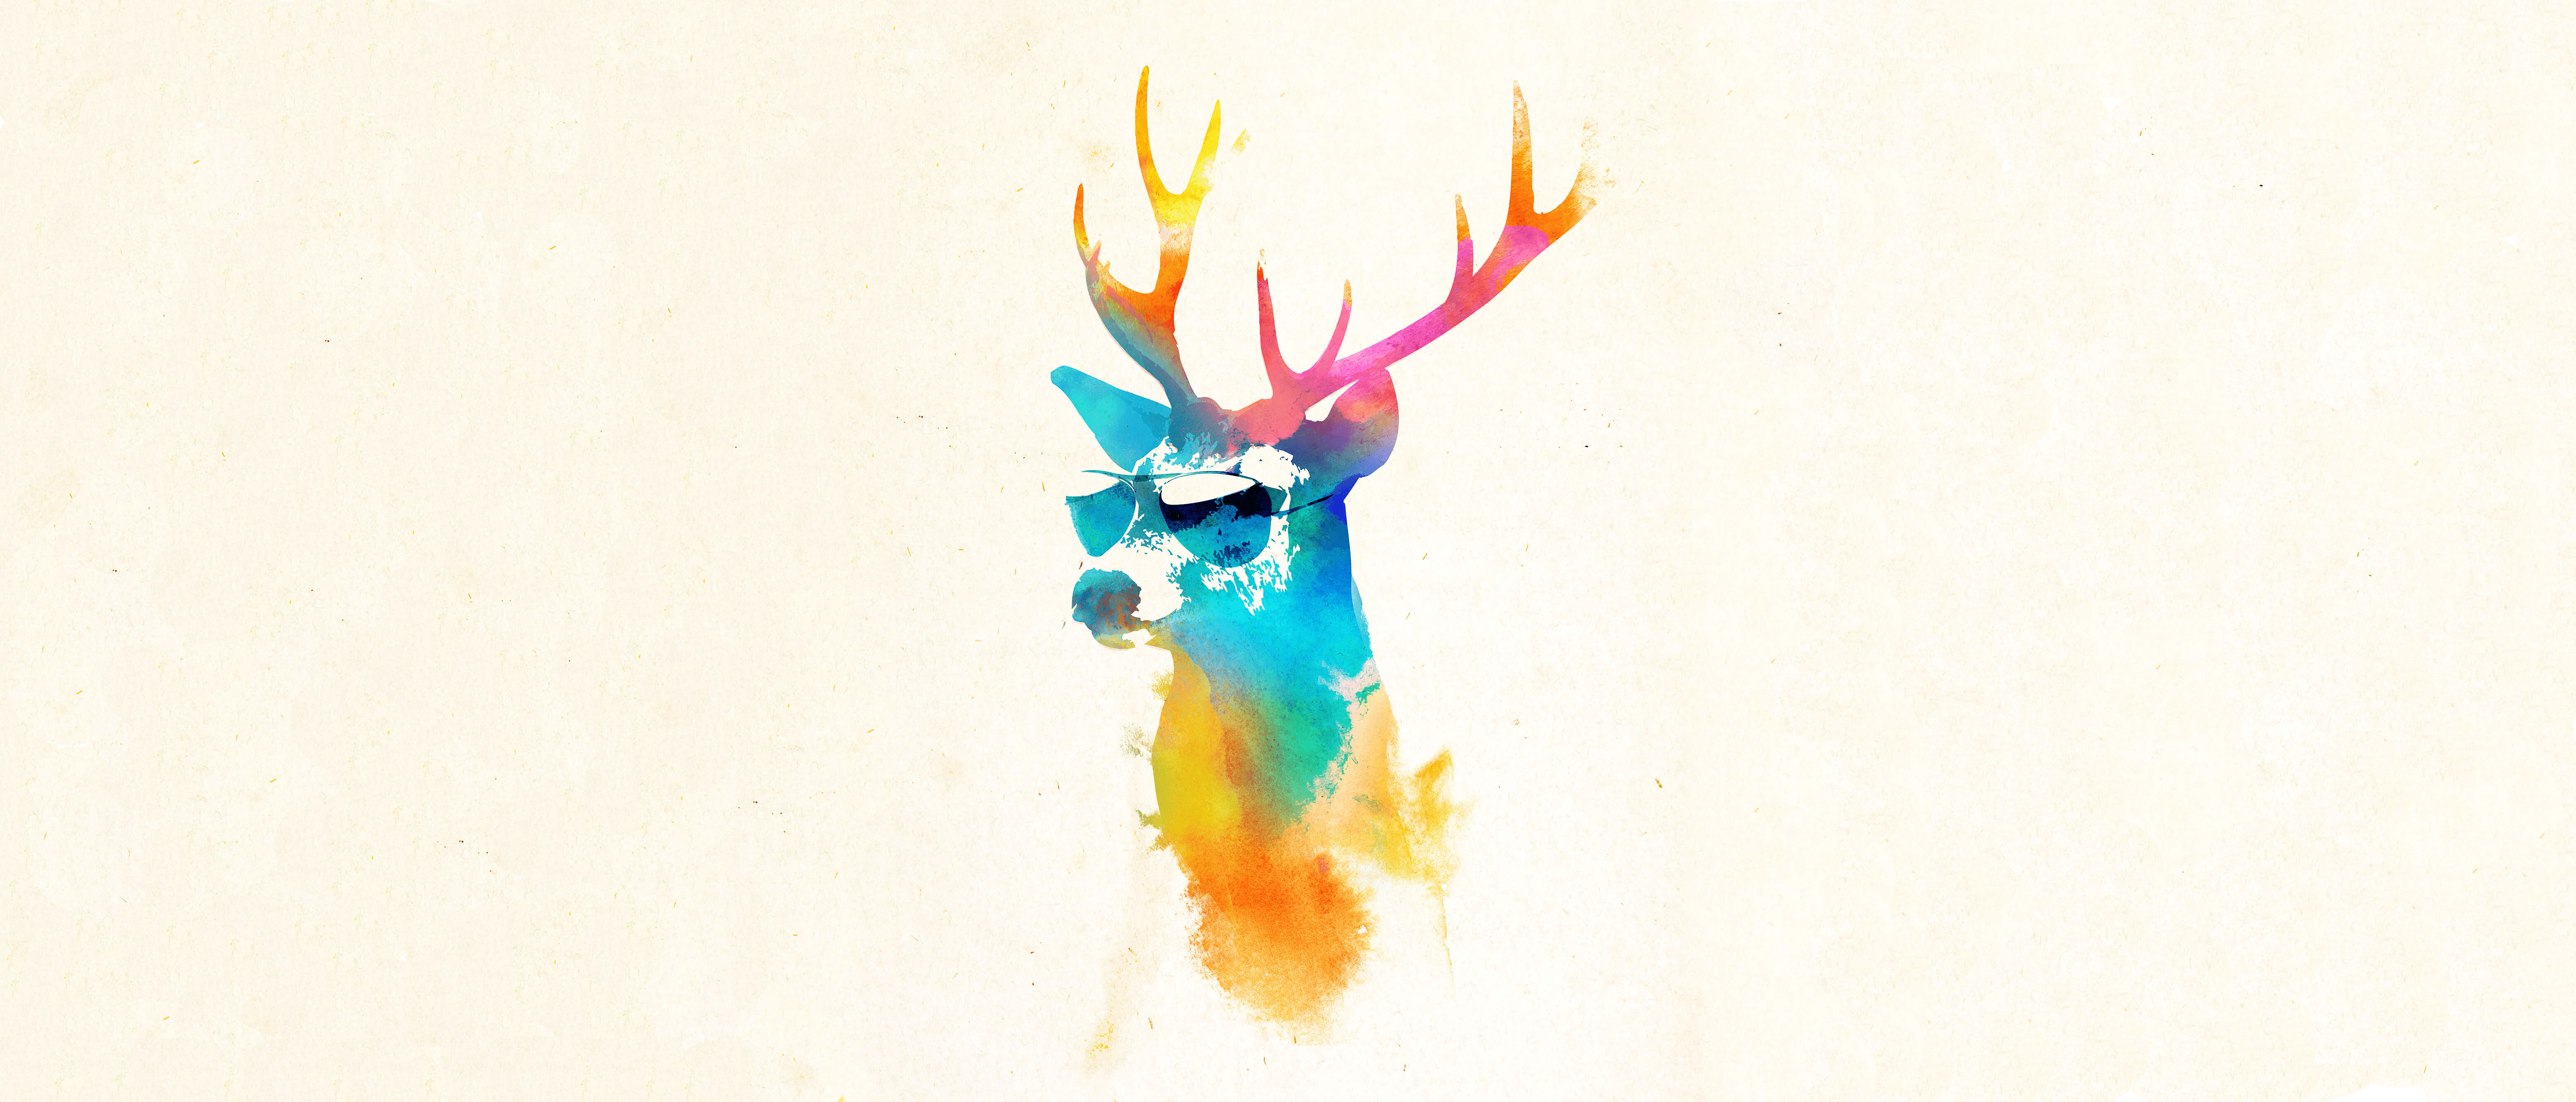 Sunny Stag by Robert Farkas [6211x2662]